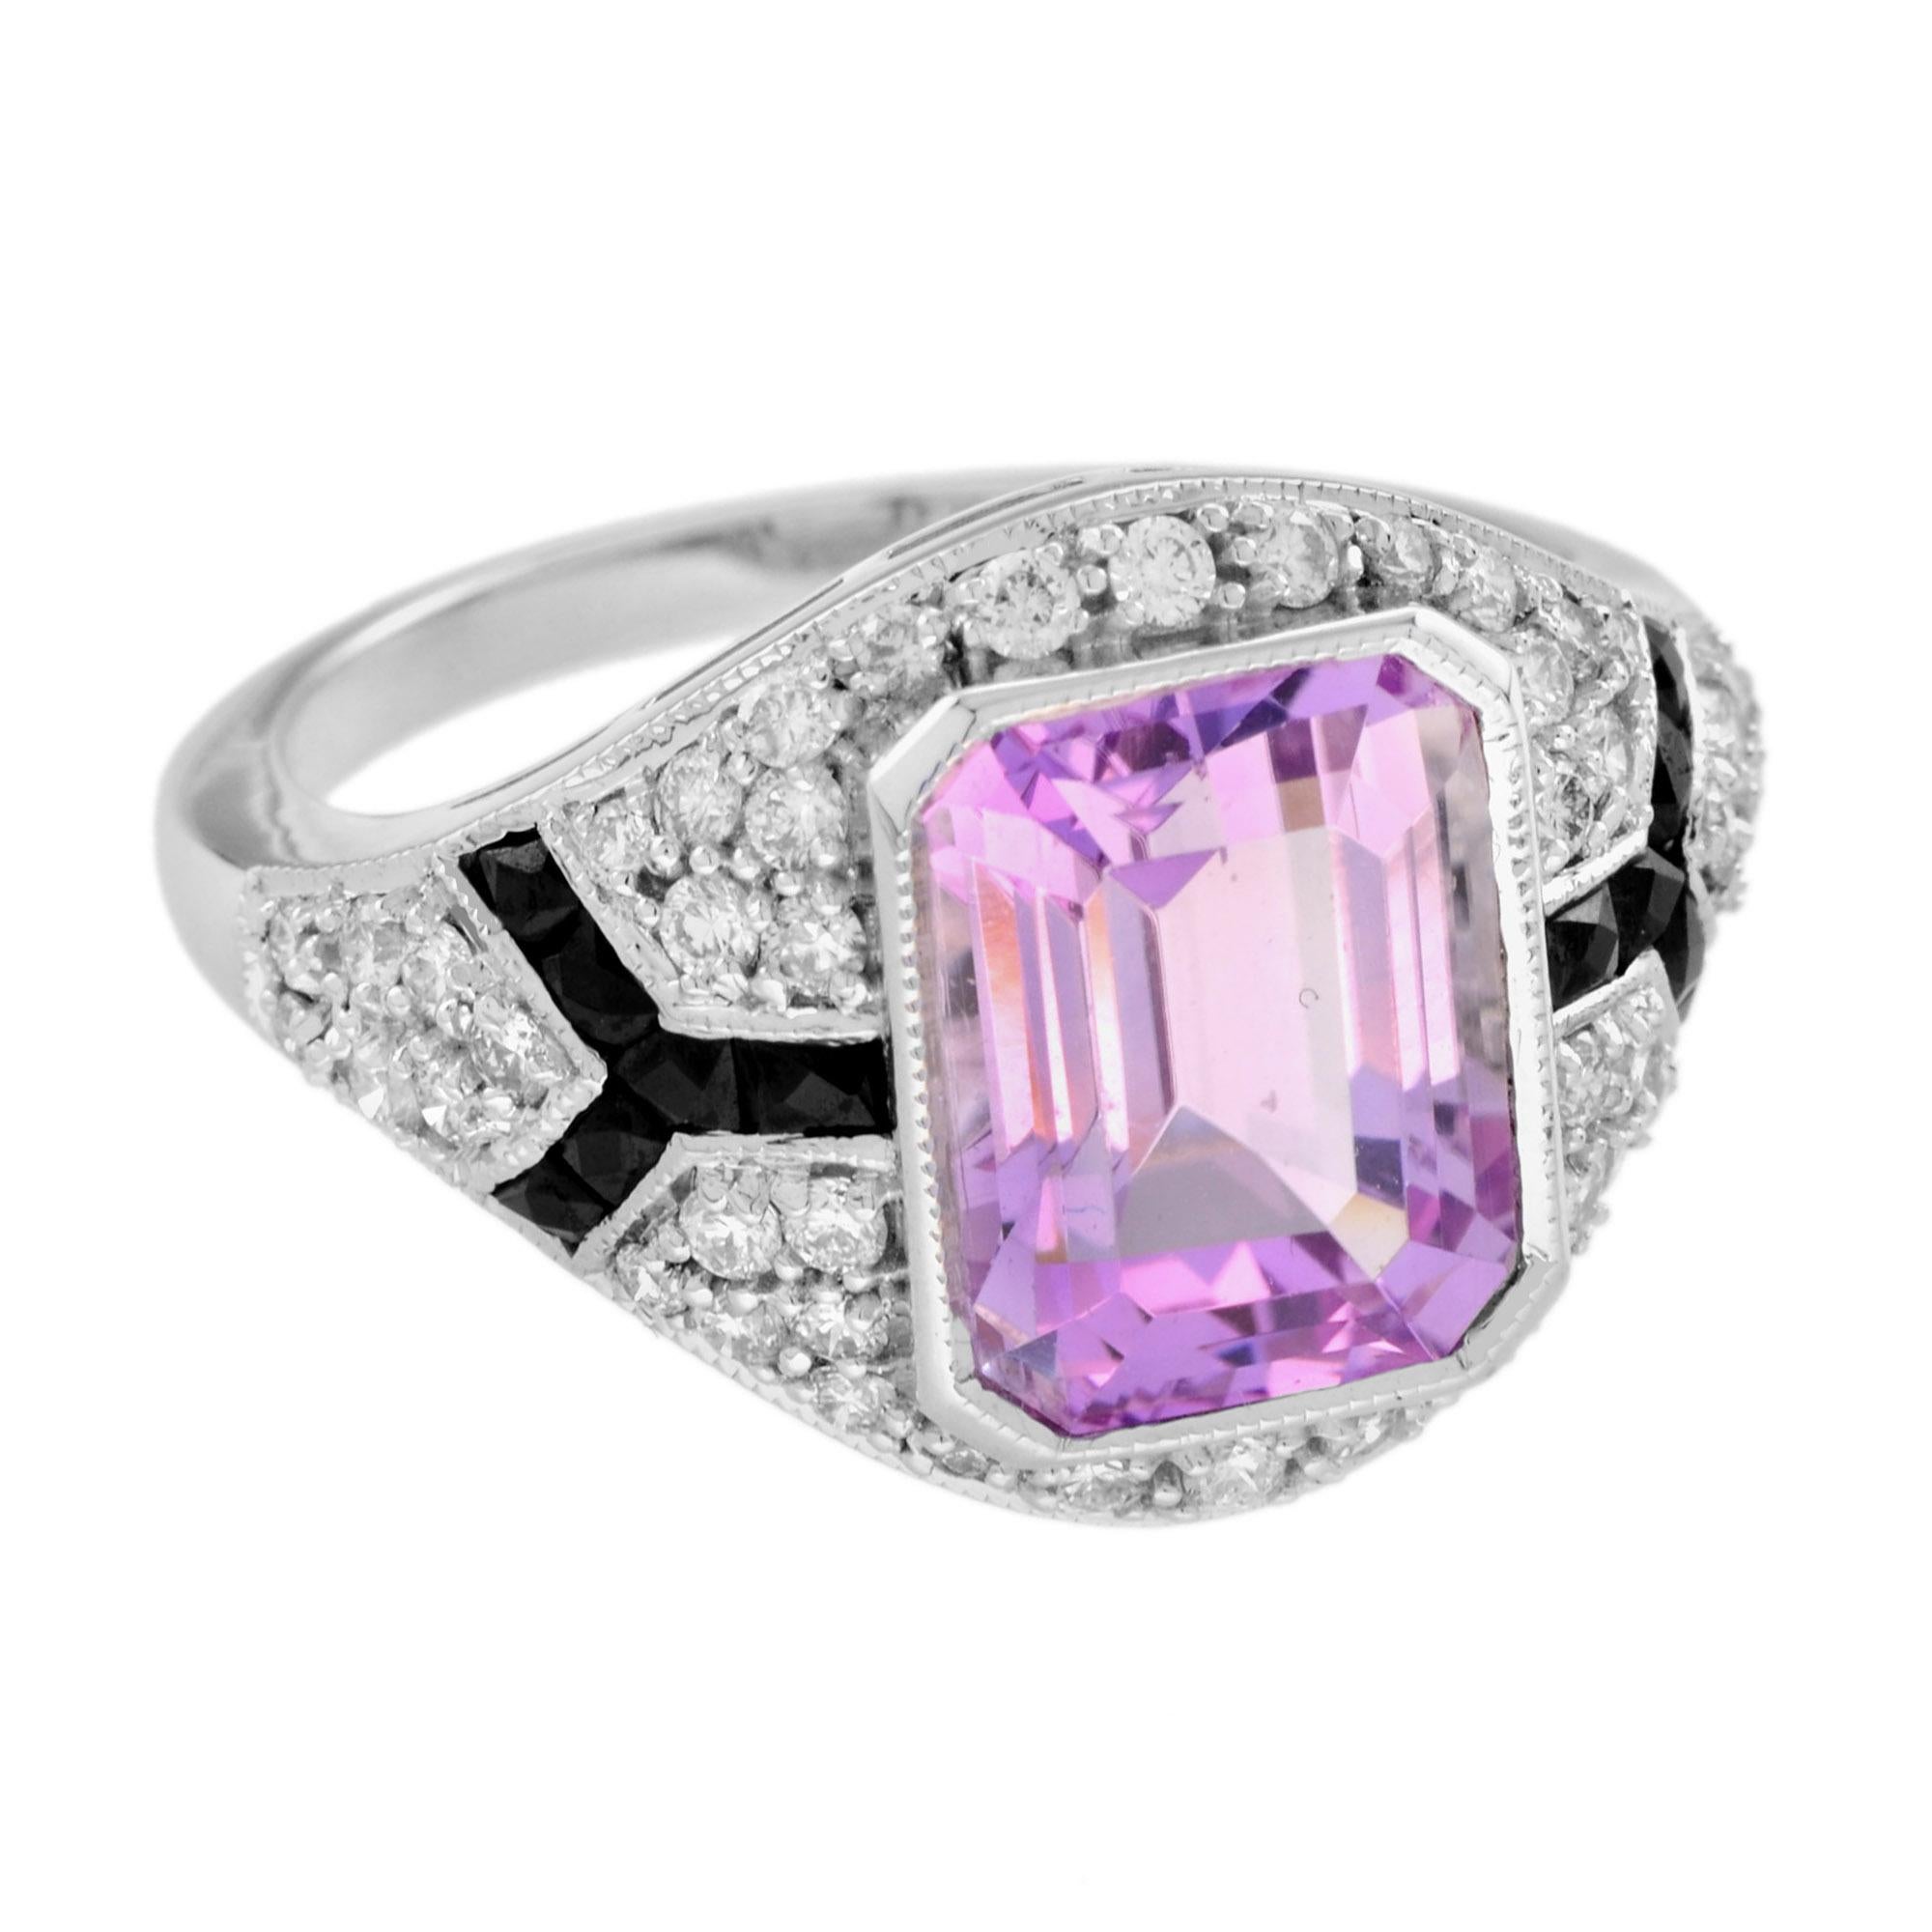 The centerpiece of the ring is a 3.82 carats emerald cut pink kunzite highlight by .60 carat round brilliant diamonds. The sides of the polished 18k white gold ring are edged with black onyx for an extra touch of elegance.   

Ring